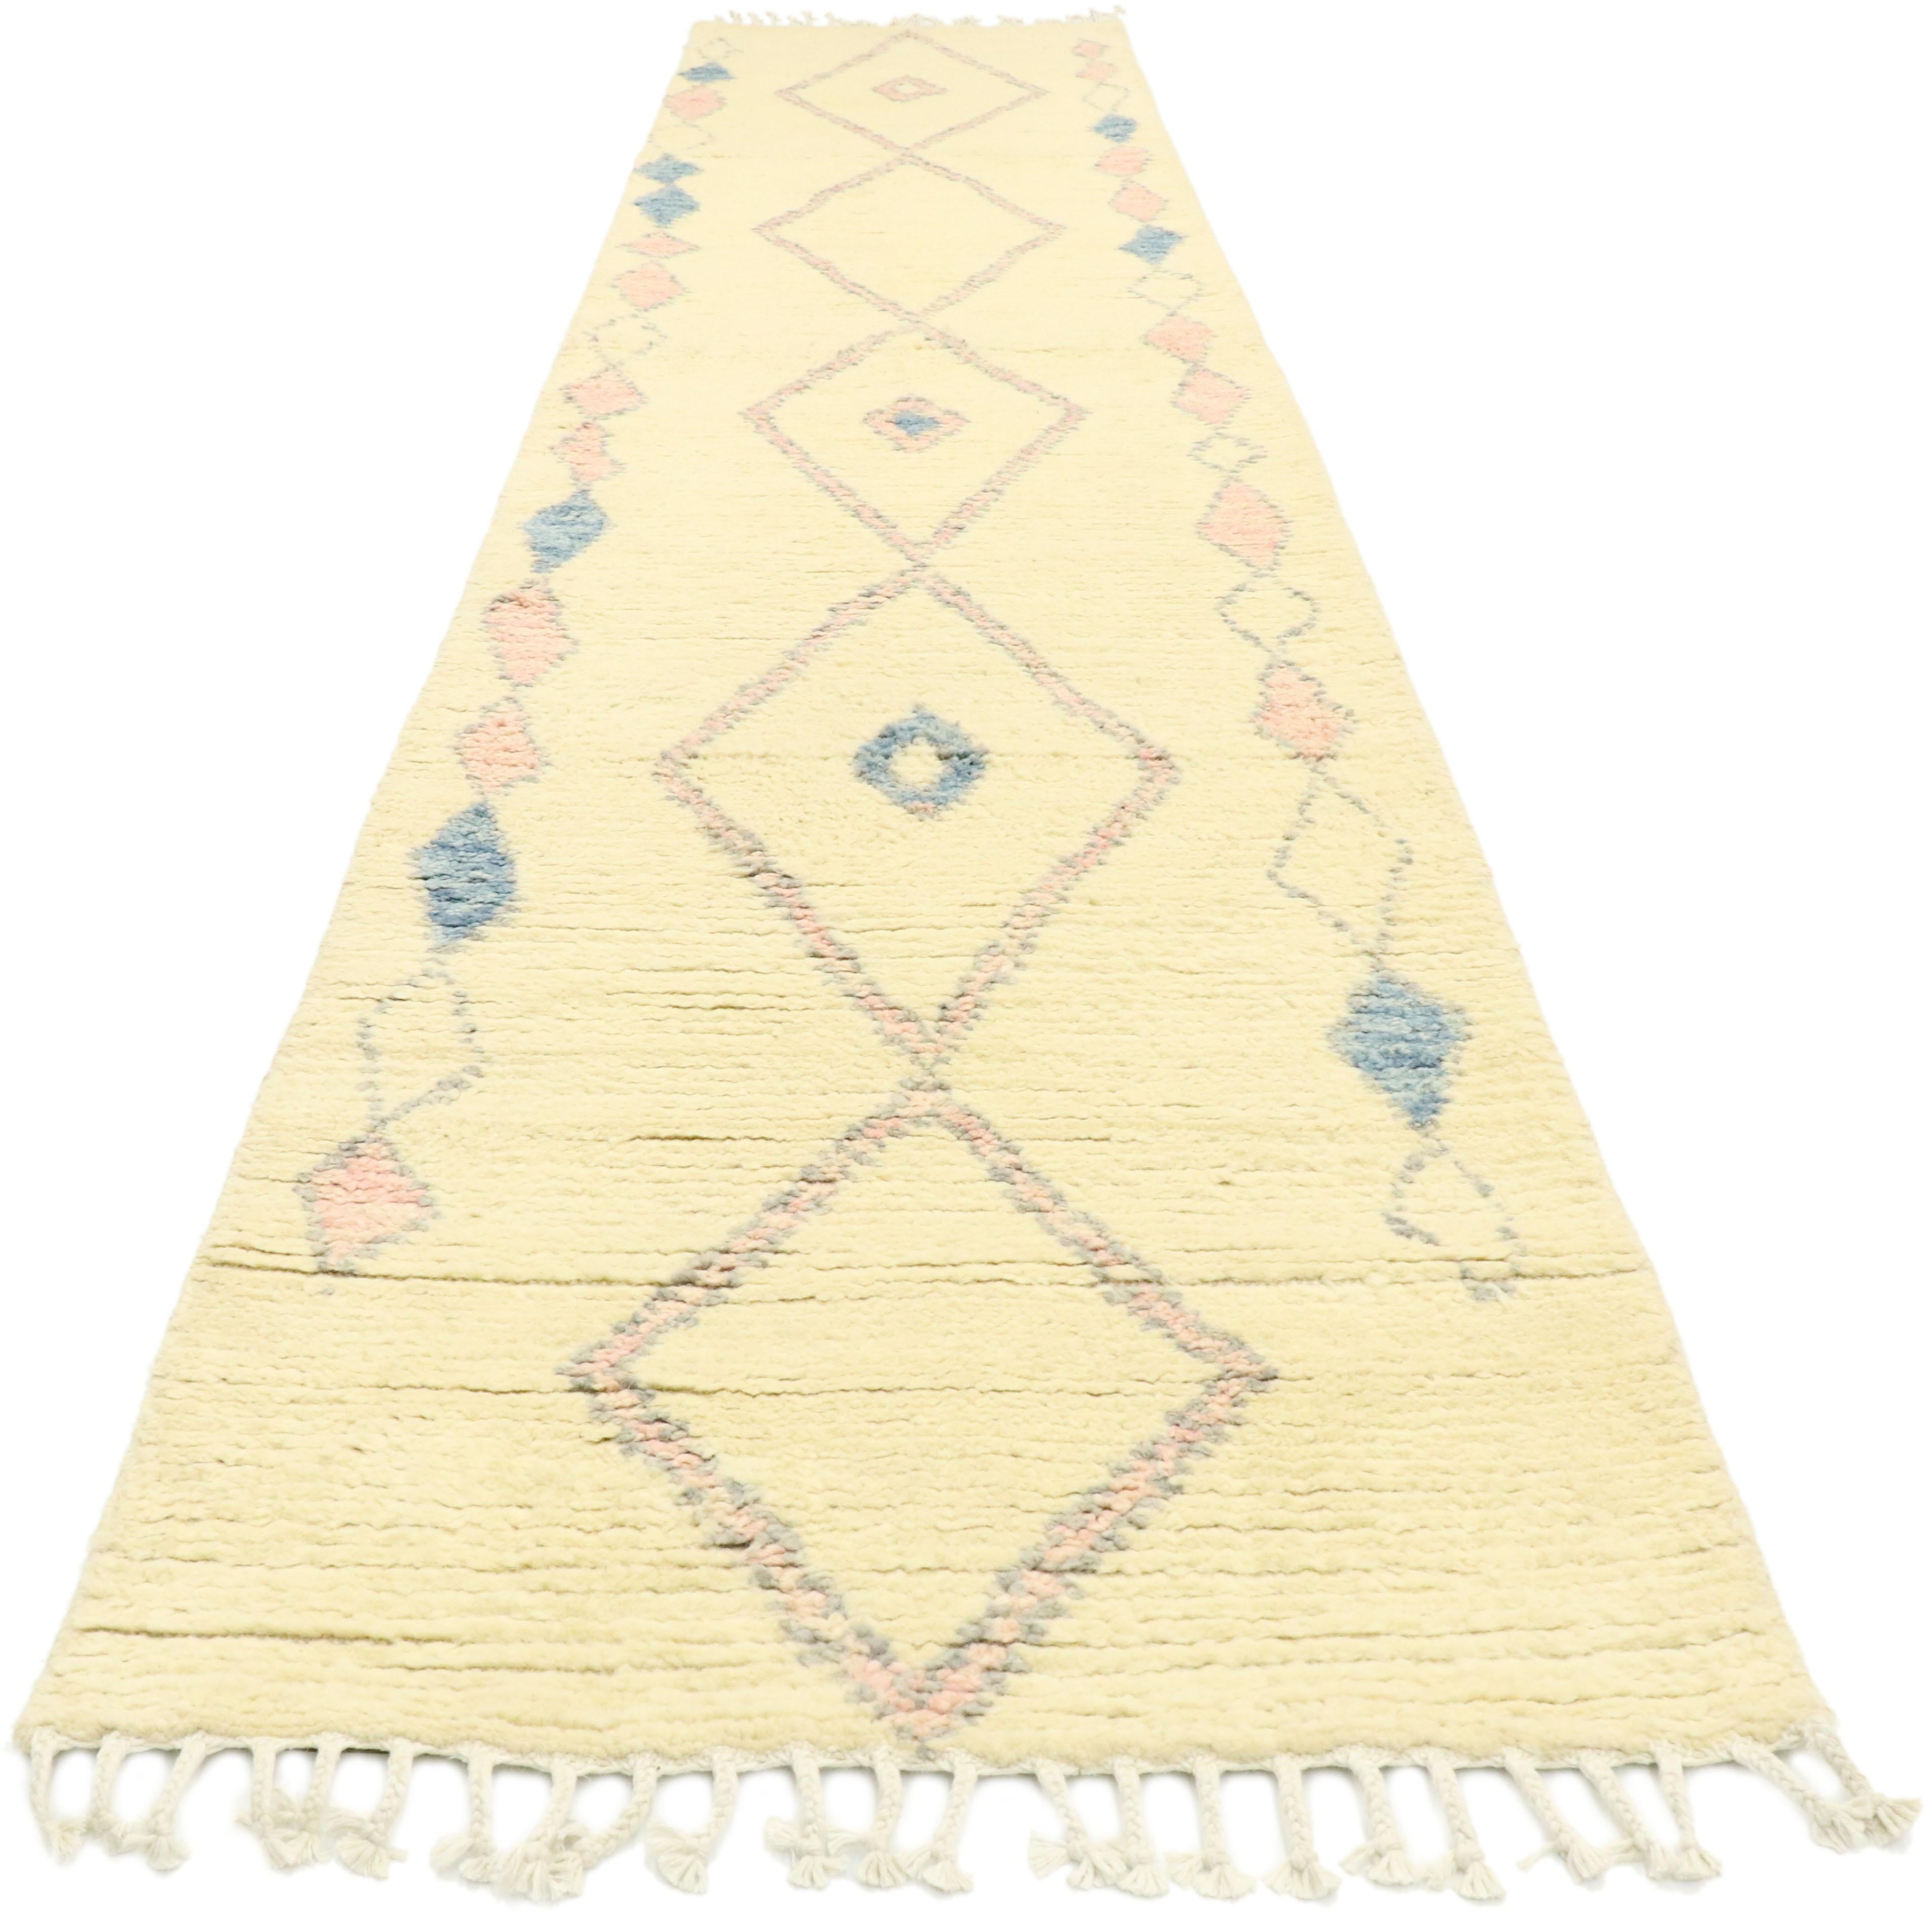 Pakistani New Contemporary Moroccan Shag Hallway Runner with Bohemian Tribal Style For Sale